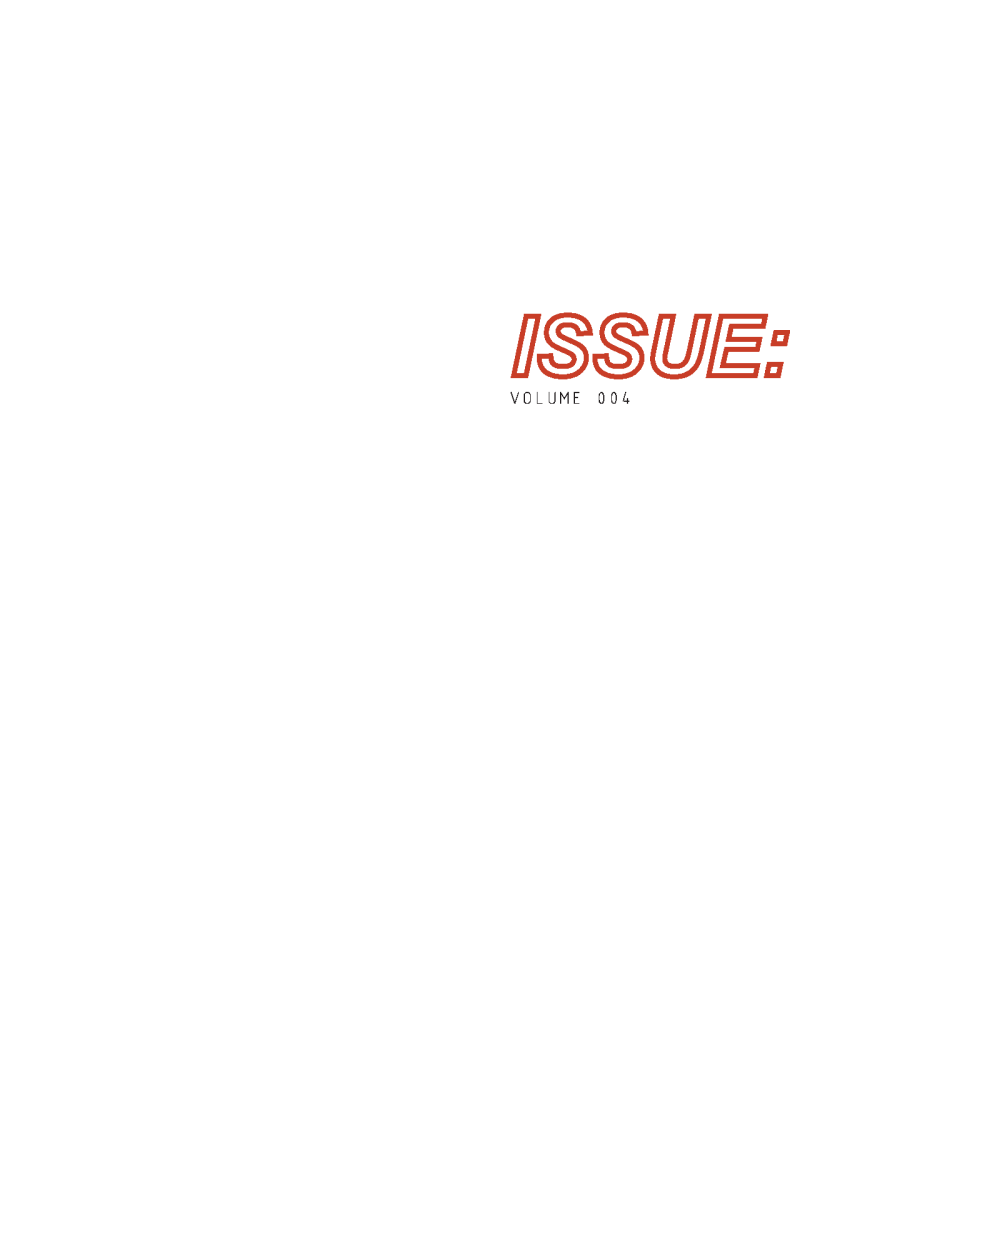 ISSUE: 004